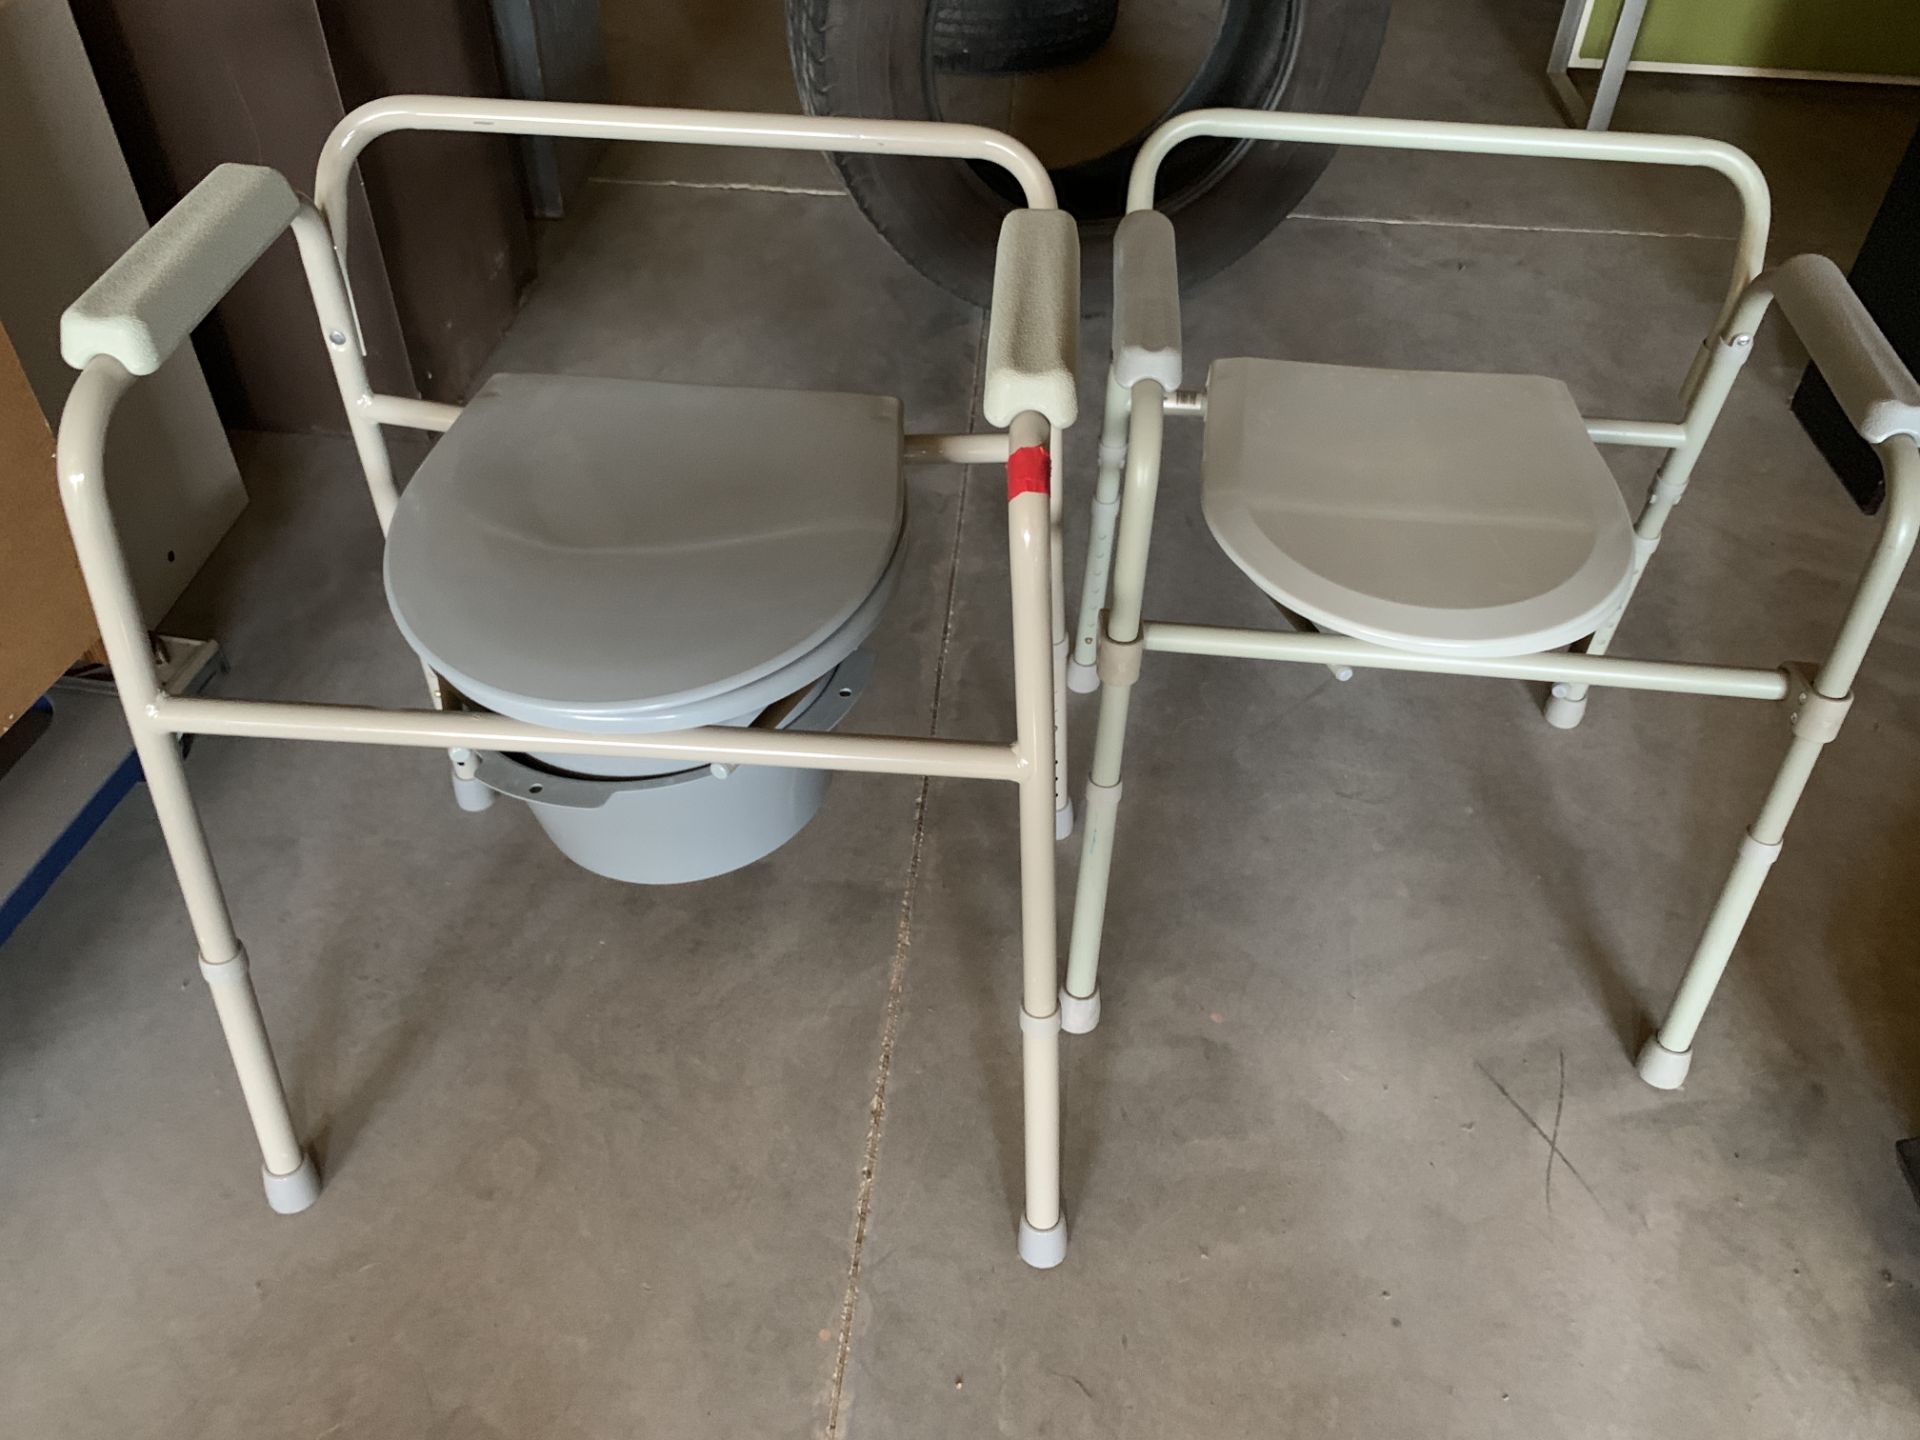 2 Toilet Assistance Seats with Handles **Las Vegas Pick-Up only, see description below** - Image 2 of 4